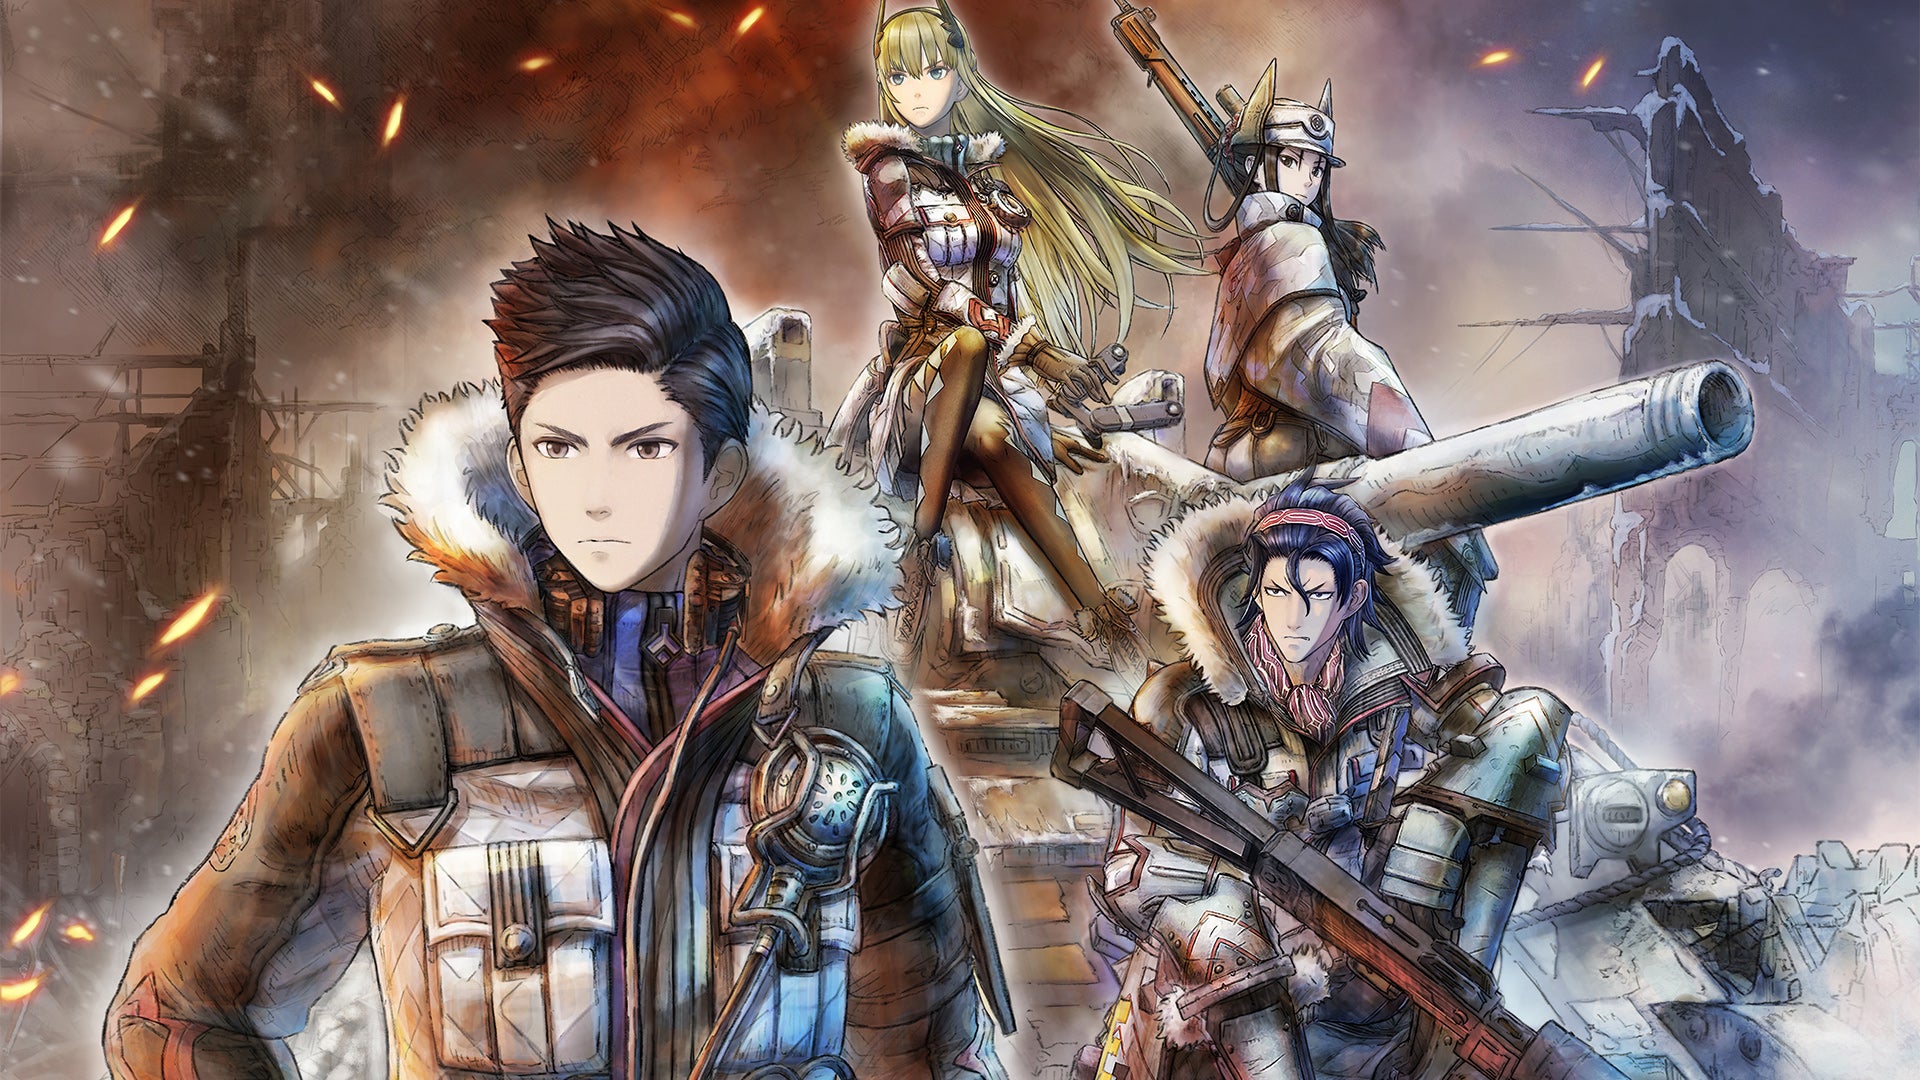 Valkyria Chronicles 4 heading to PC, consoles in September.